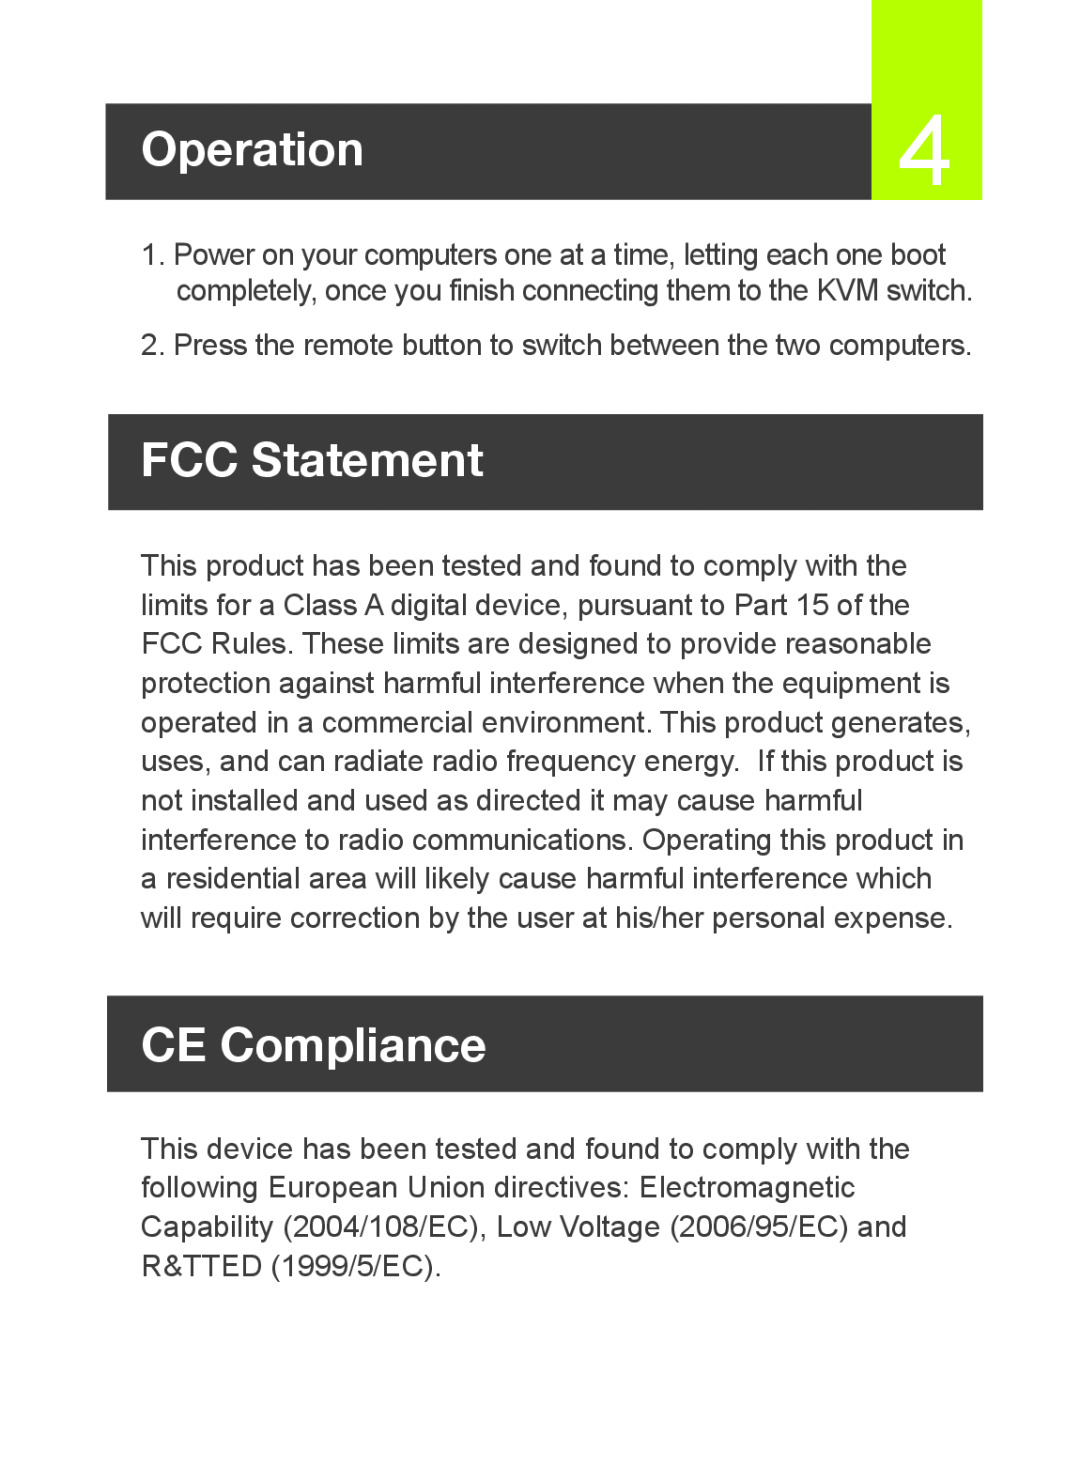 IOGear GCS922U Operation4, FCC Statement, CE Compliance, Press the remote button to switch between the two computers 